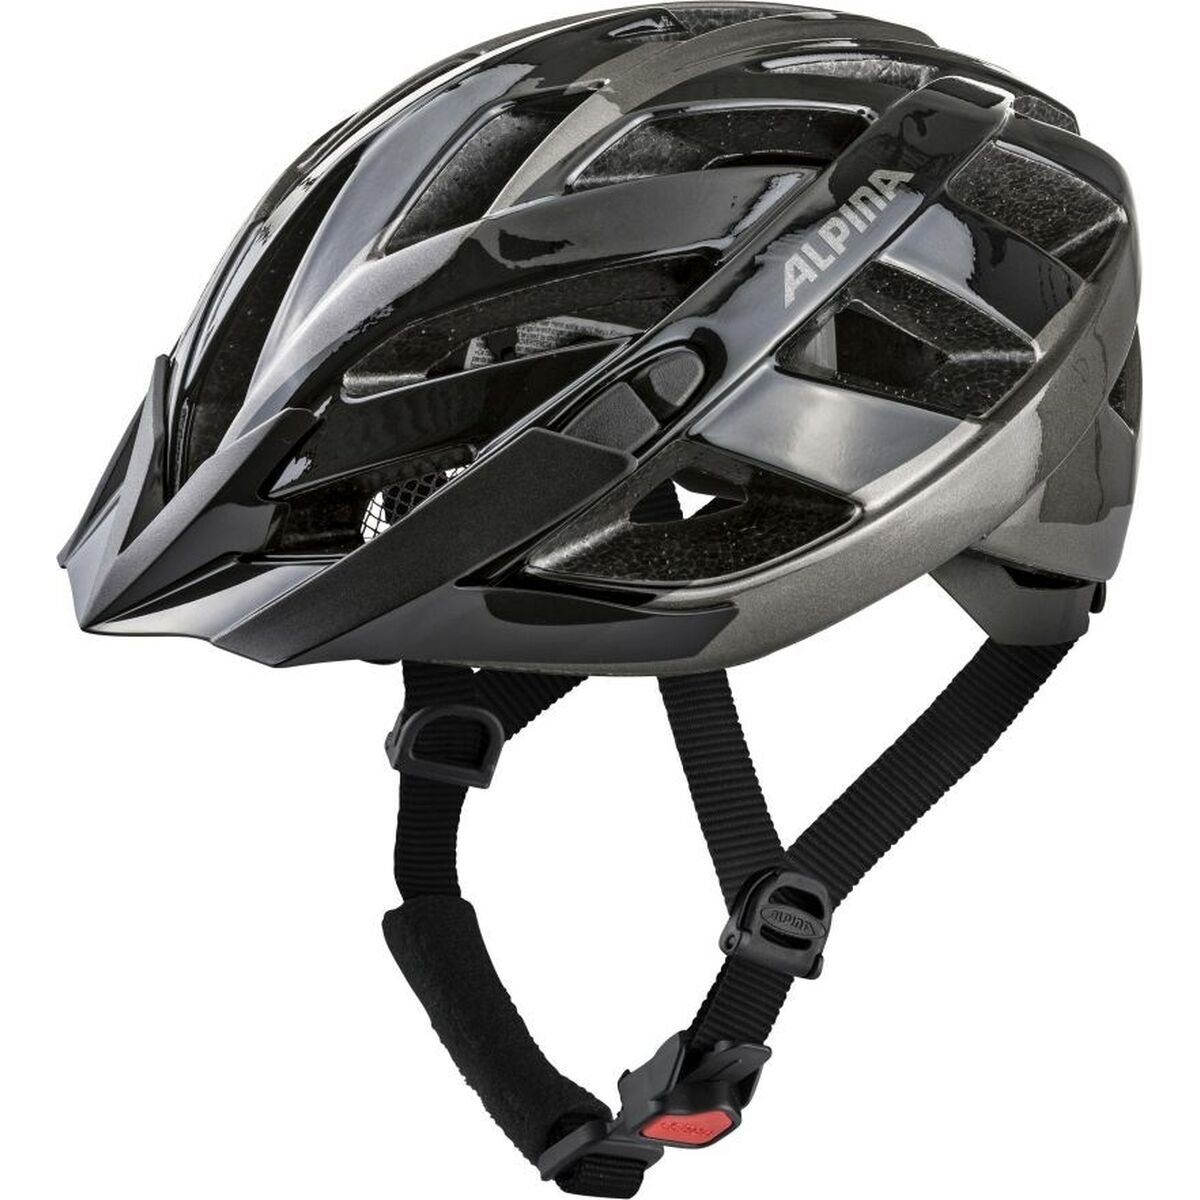 Adult's Cycling Helmet Alpina Panoma 2.0 Anthracite 56-59 cm